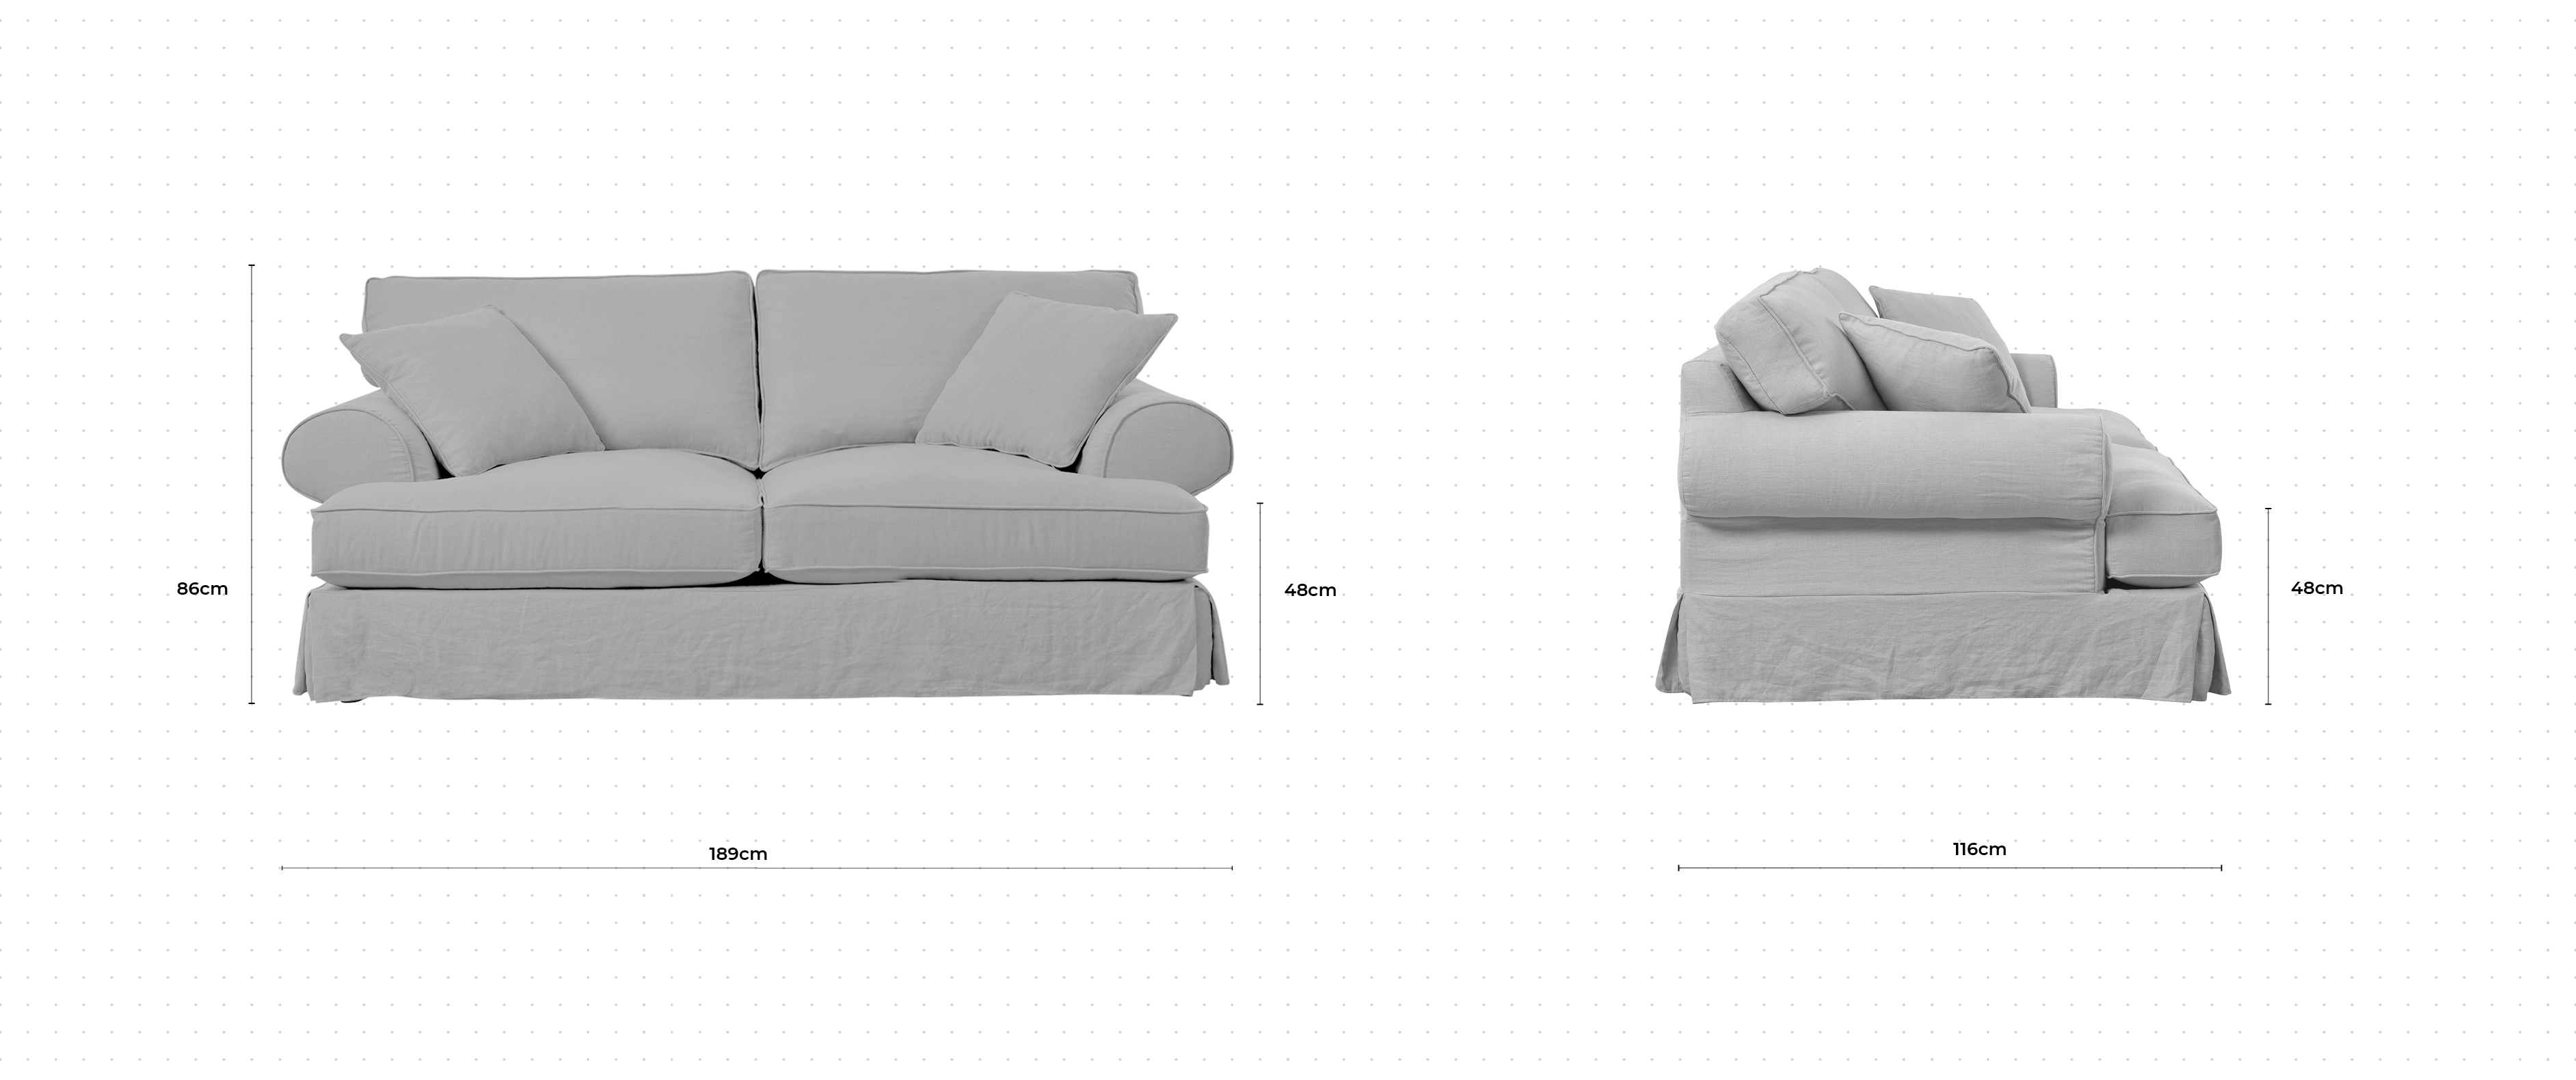 Sands 2 Seater Sofa dimensions